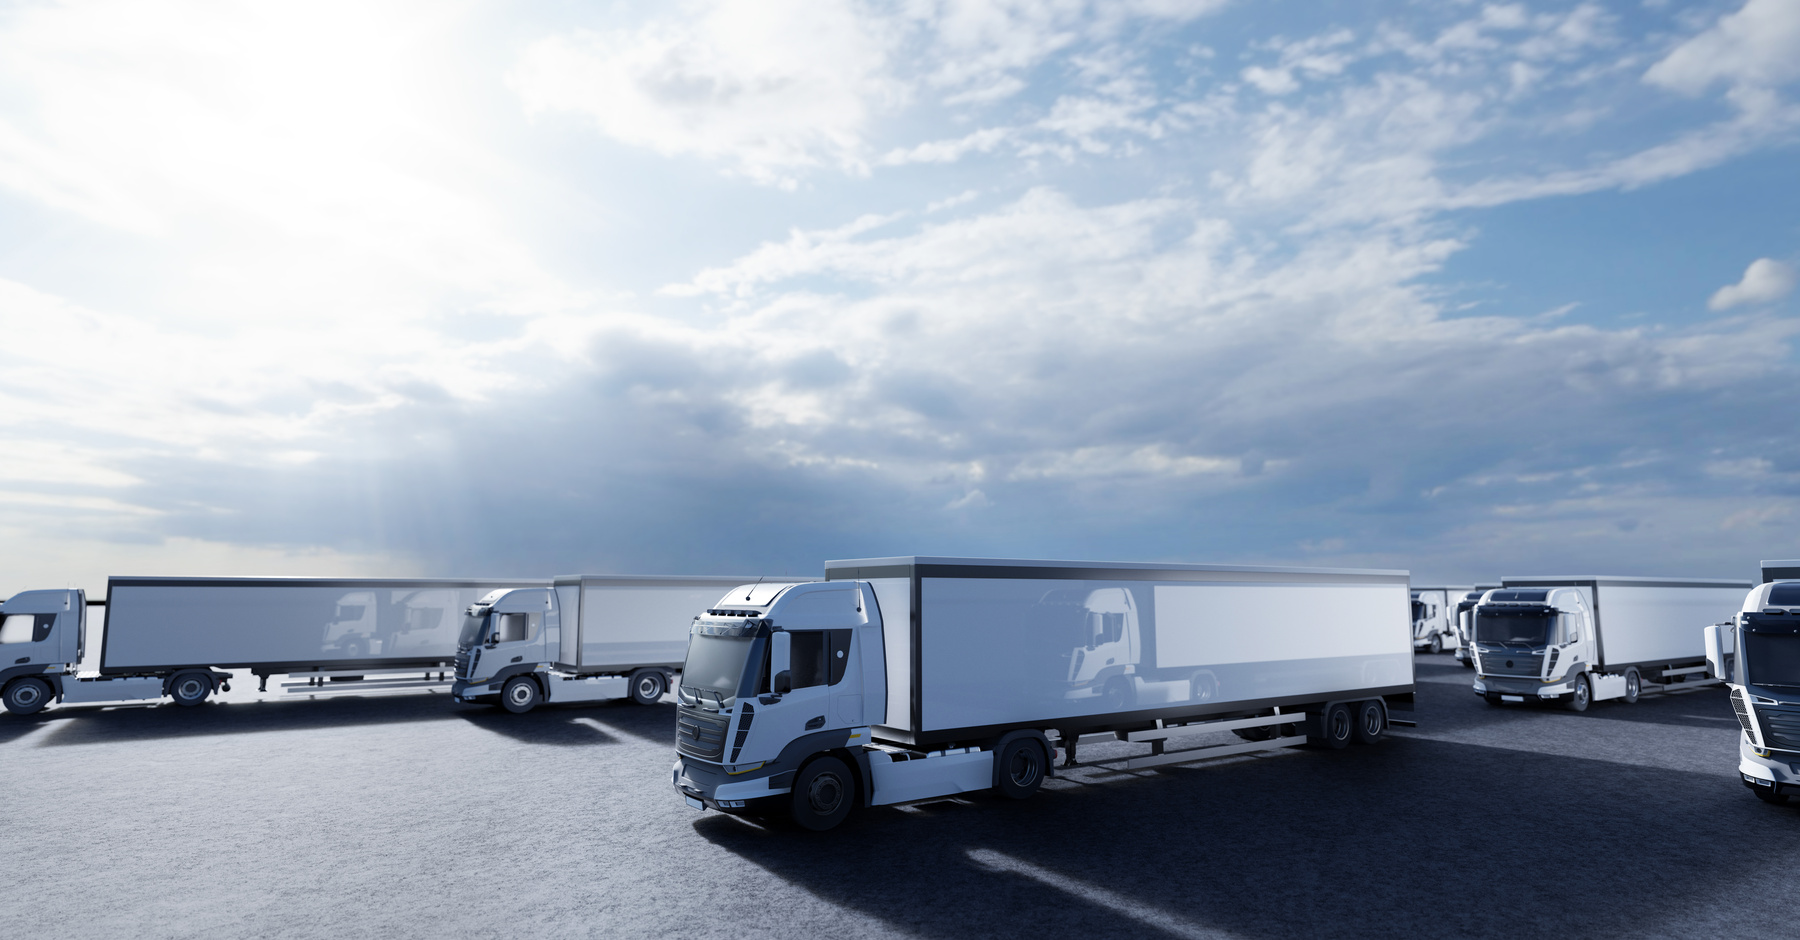 Fleet of Heavy Trucks for Logistics and Shipping Industry